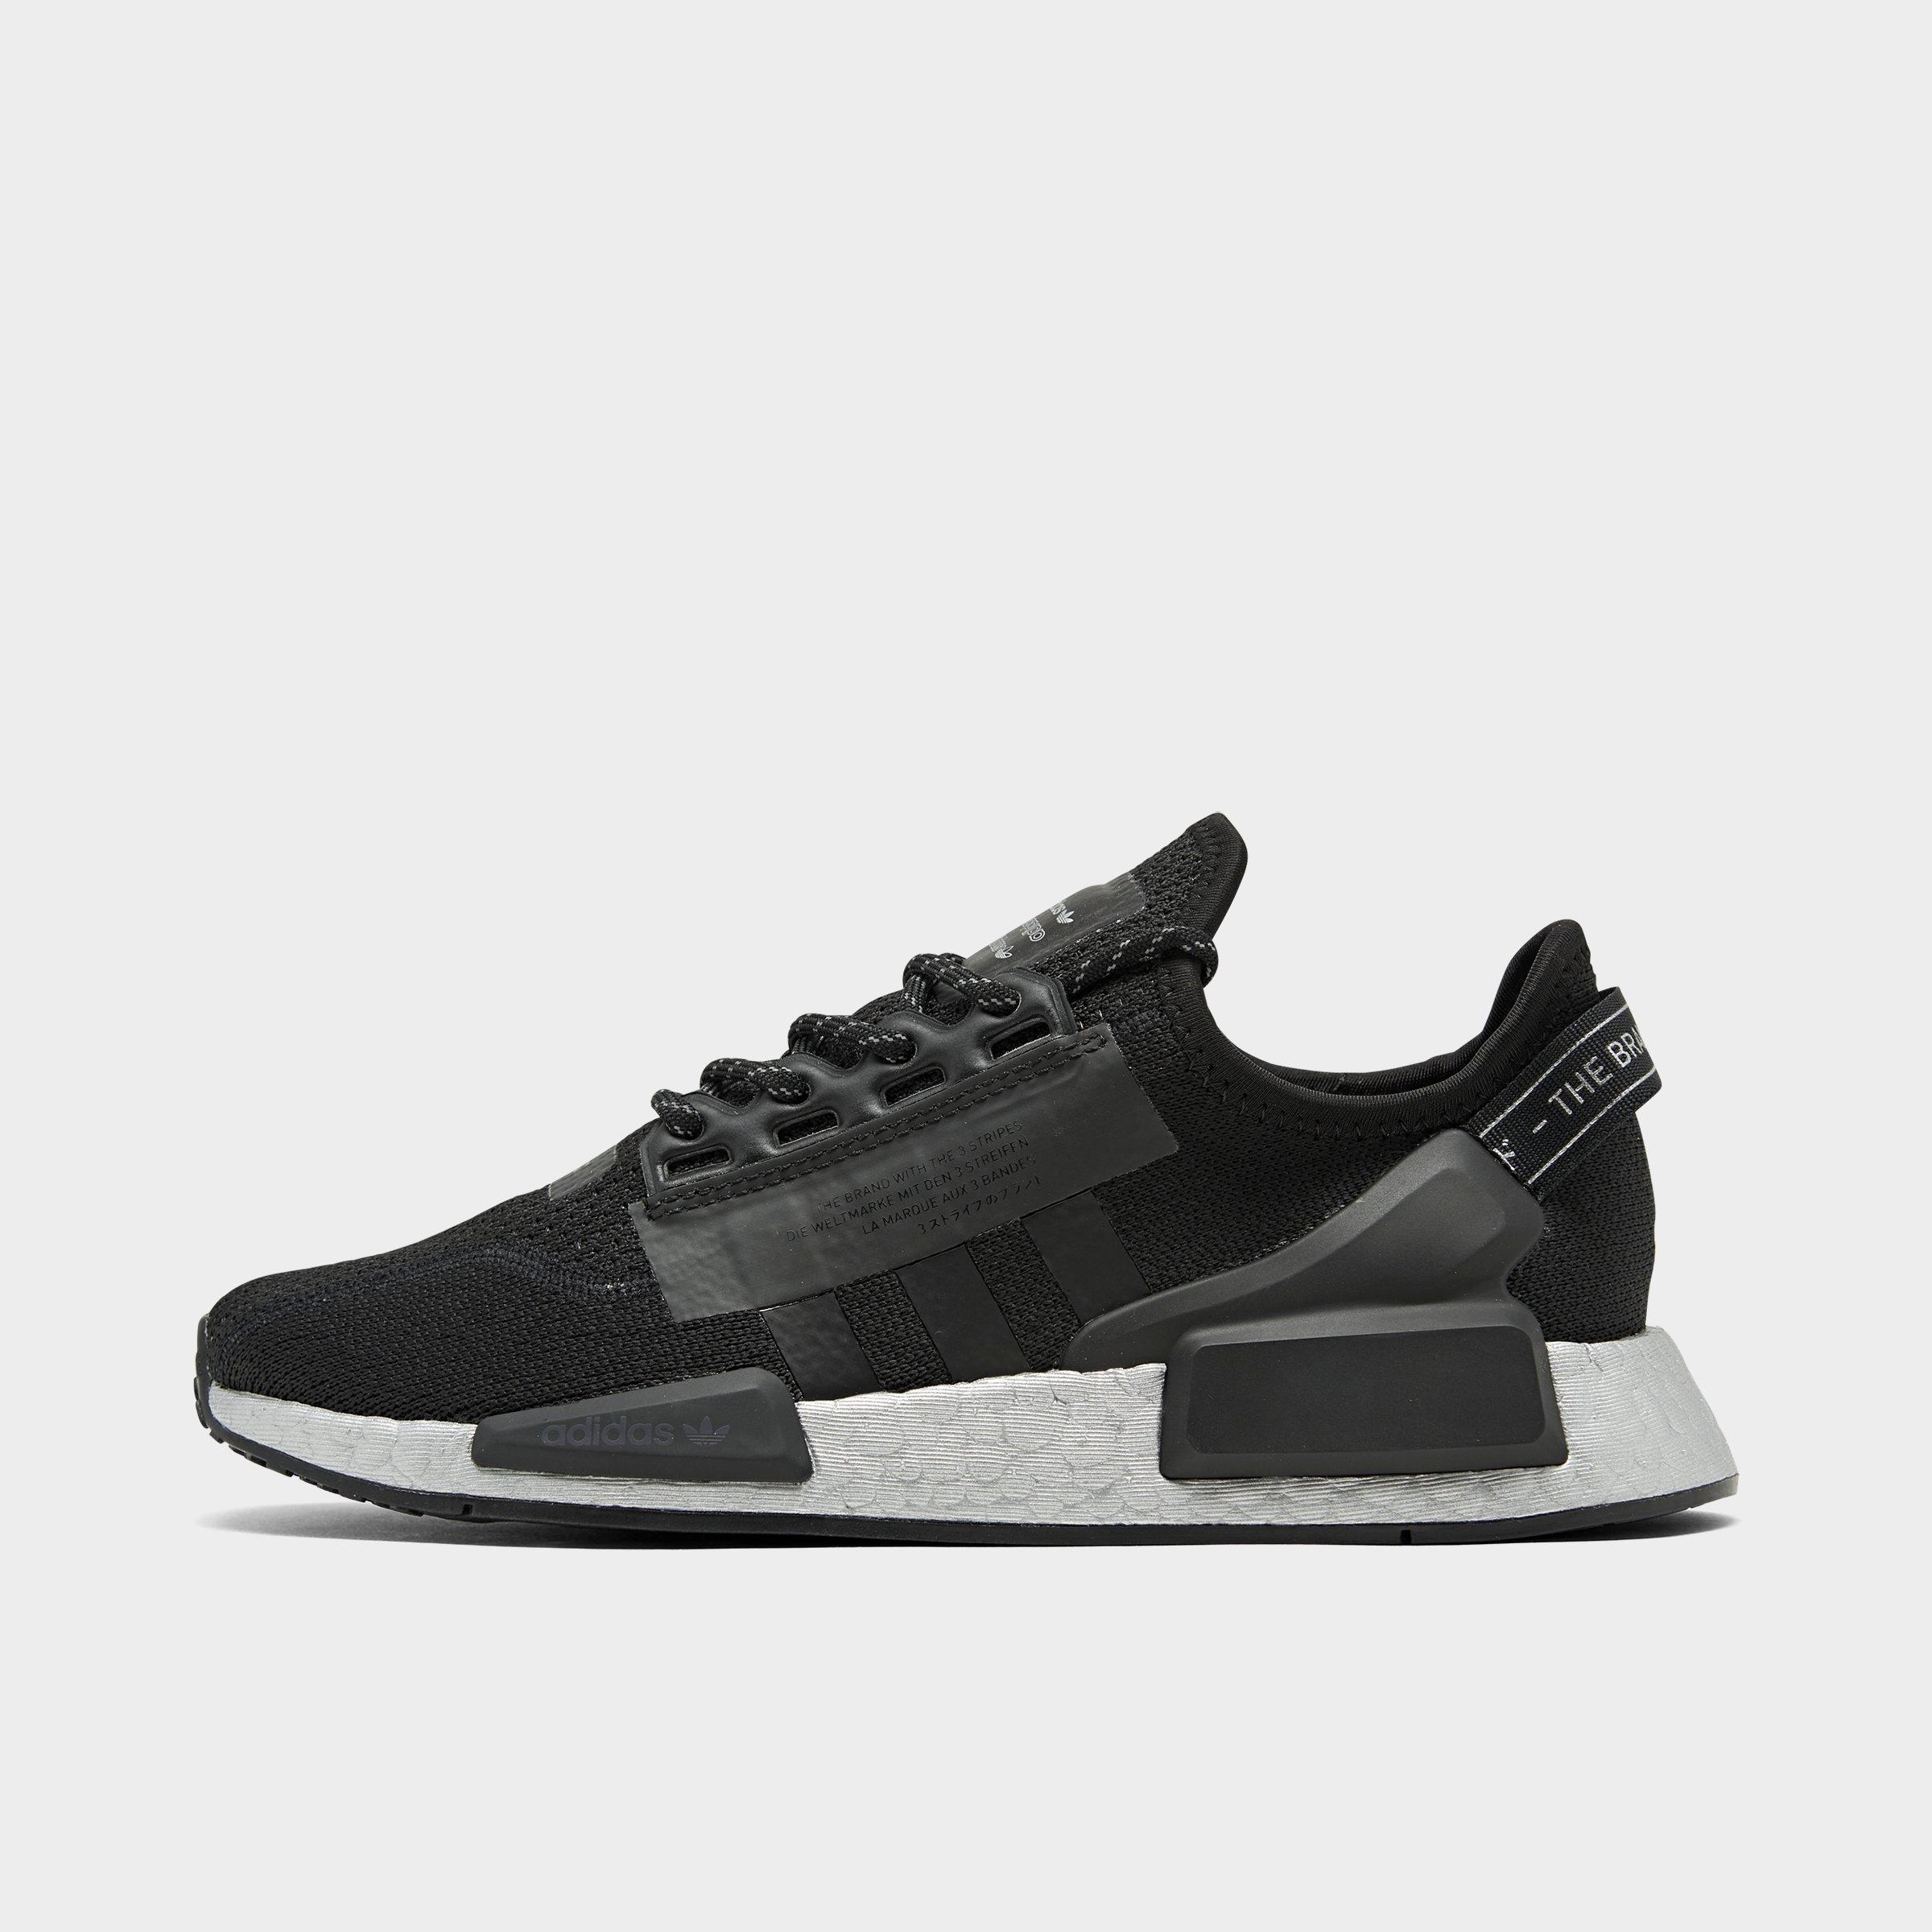 Adidas NMD R1 Athletic Shoes US Size 10 for Women ebay